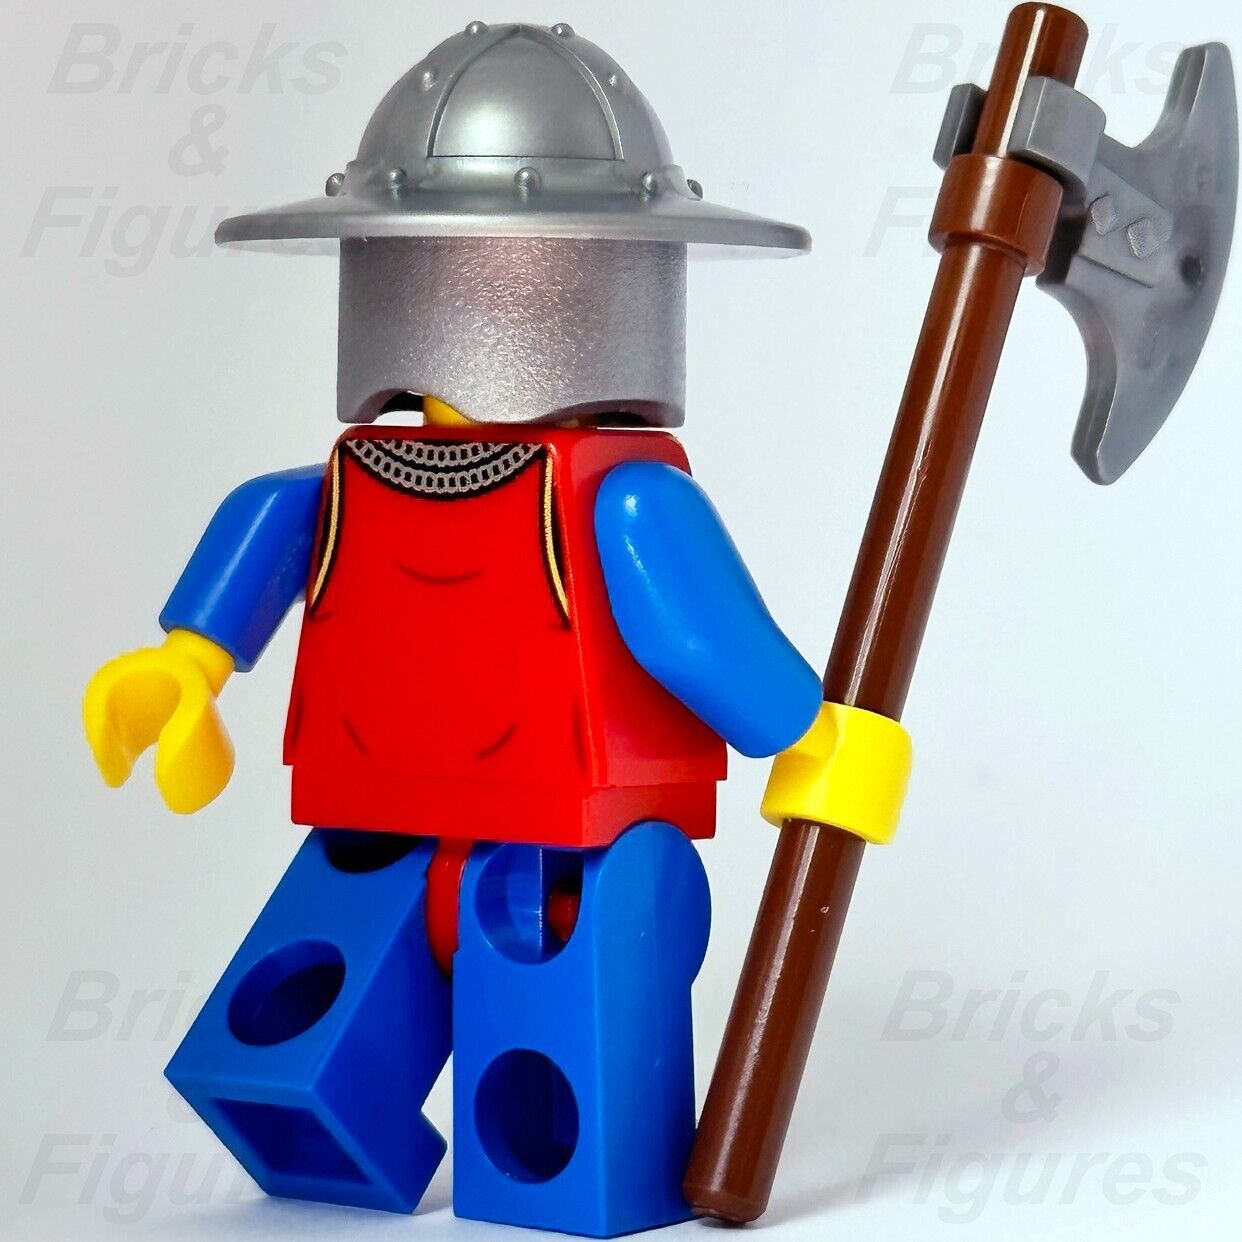 LEGO Lion Knight Castle Minifigure Lion Knights with Axe Male 10305 cas562 New - Bricks & Figures